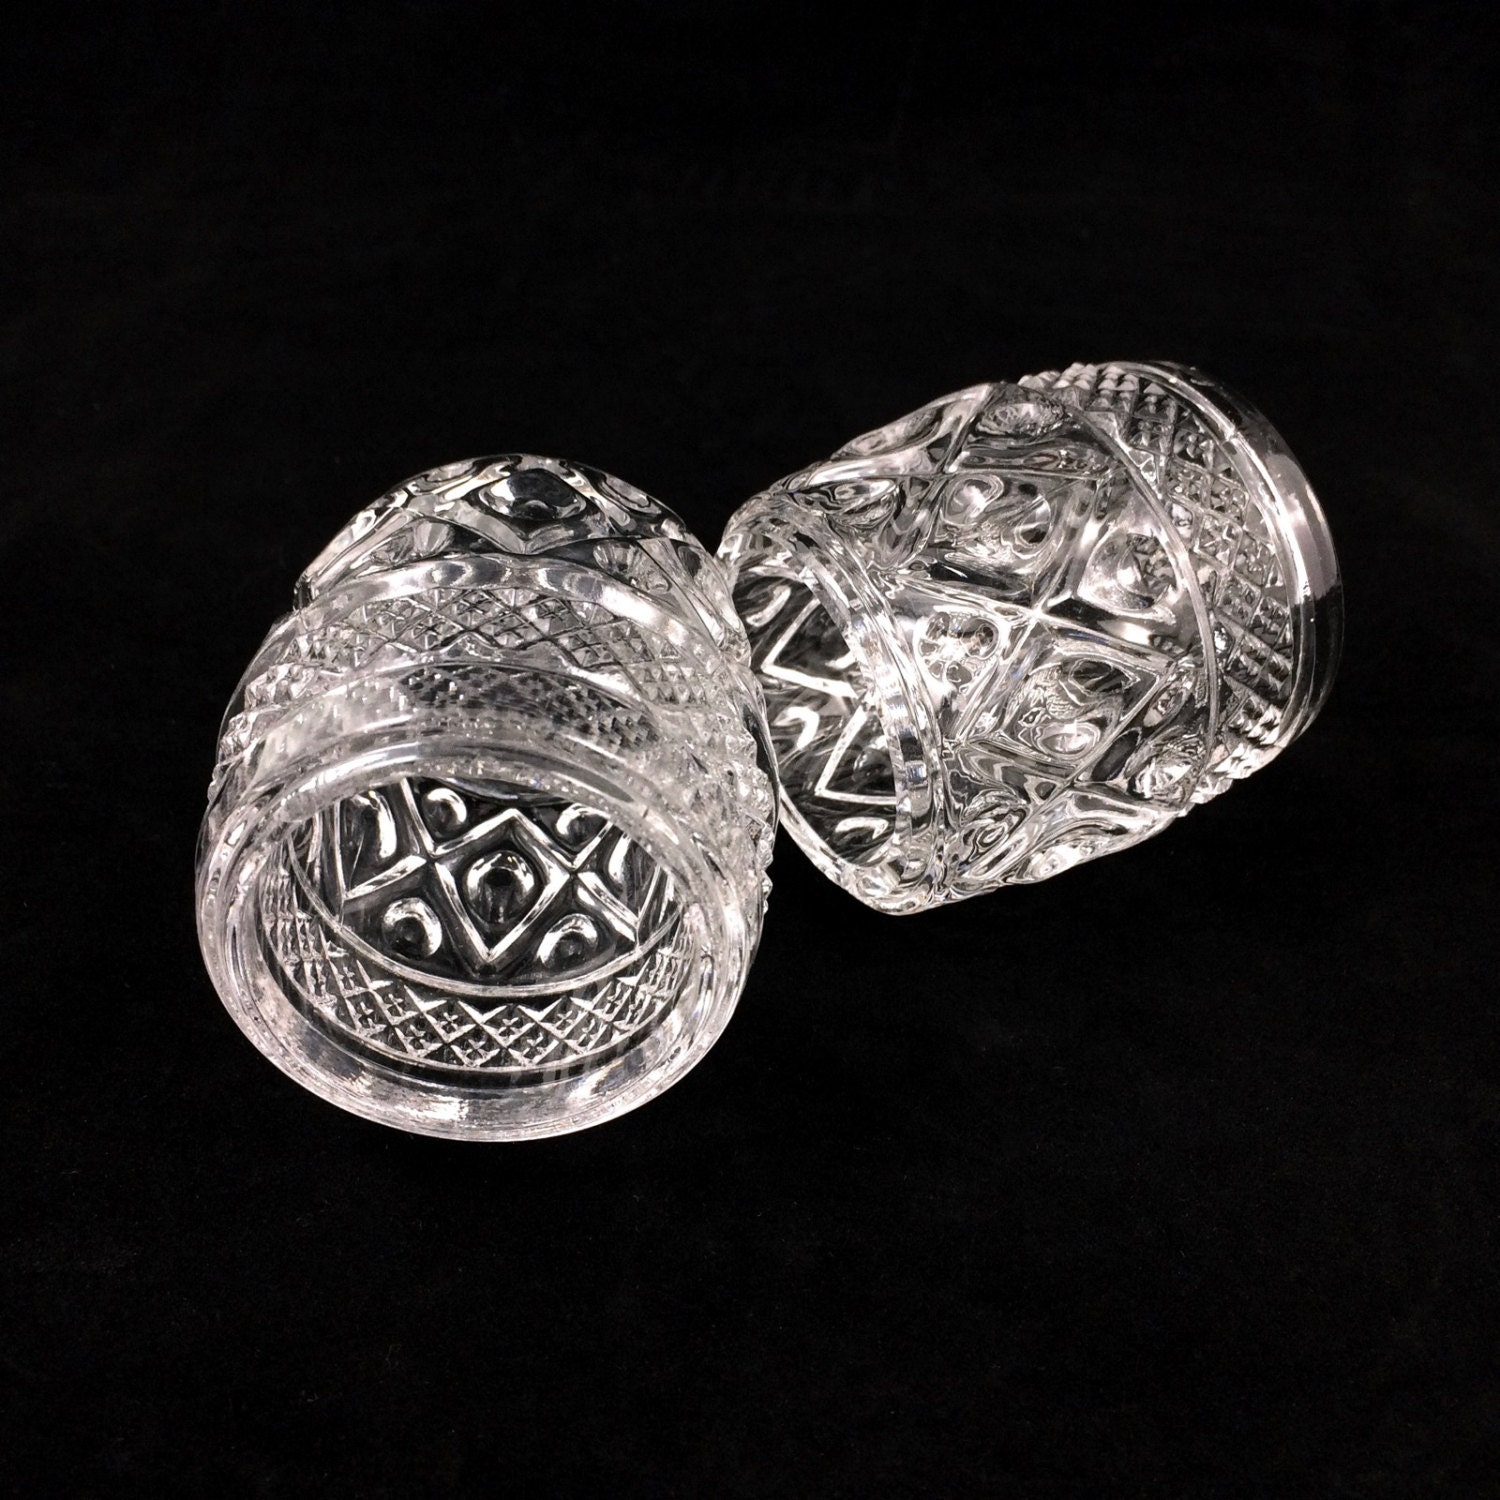 Pair of Vintage Crystal Cut Glass Napkin Rings with Diamond and ...